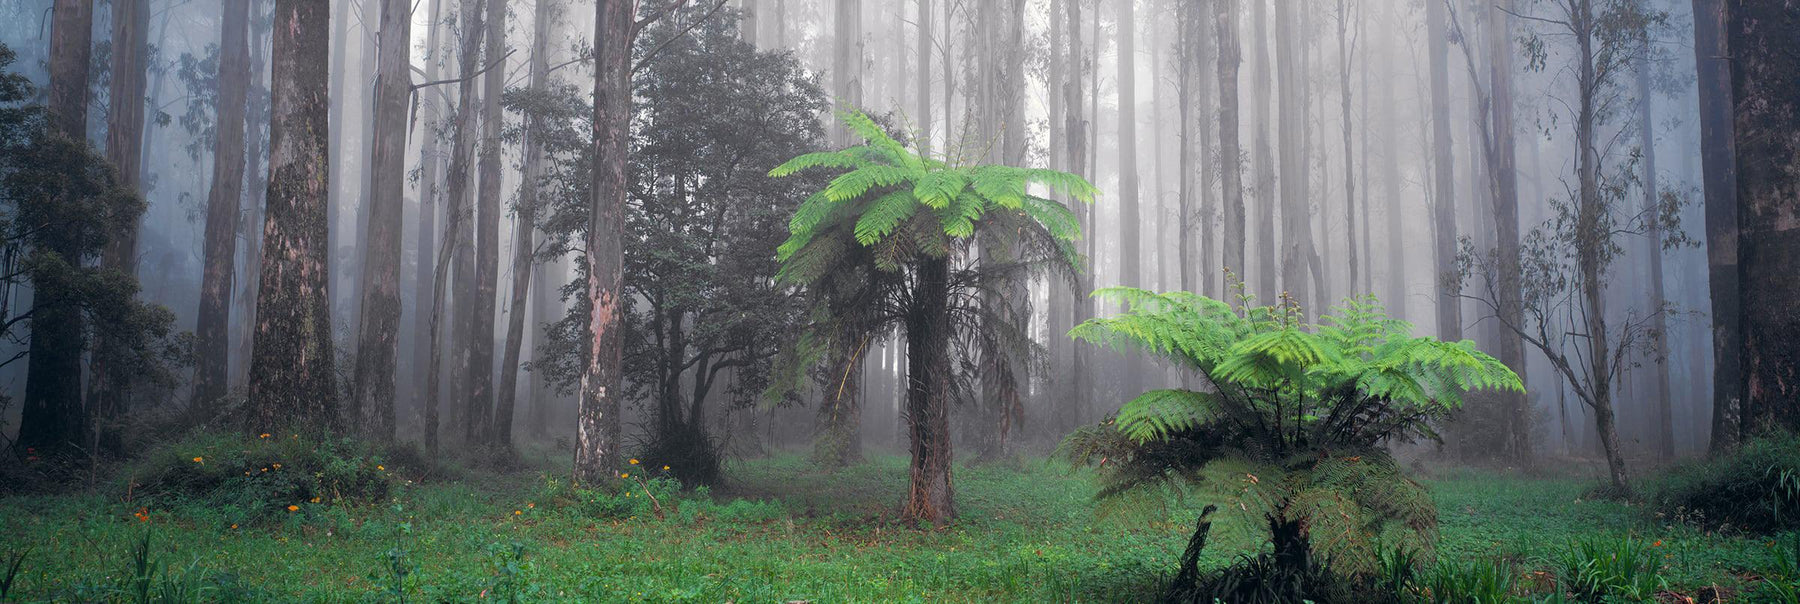 Mist filled tropical forest in the Dandenong Mountain Ranges of Australia 